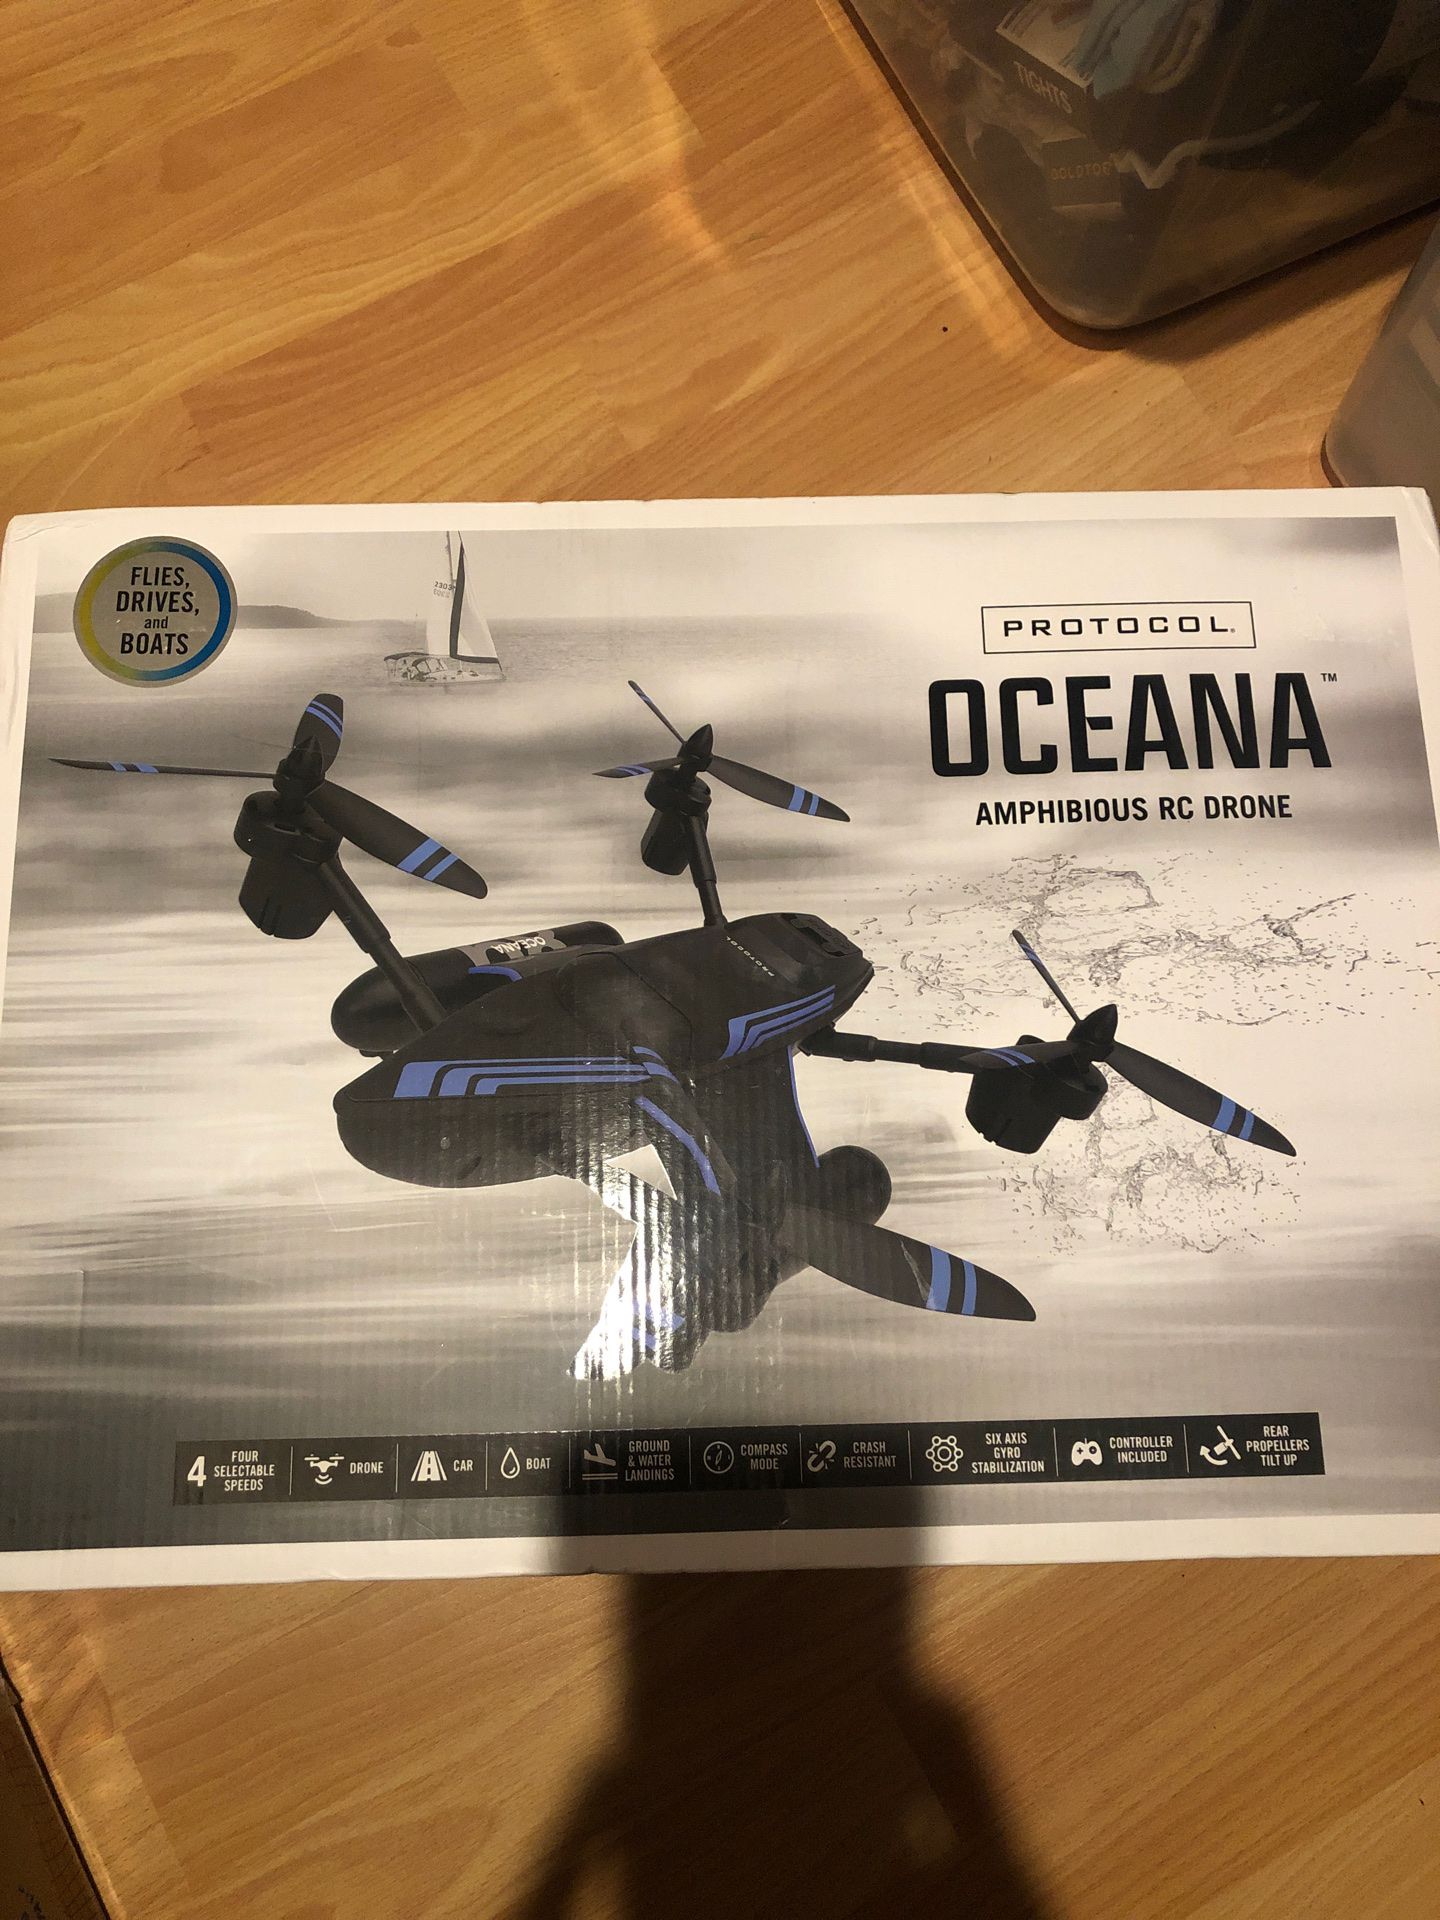 Protocol Oceana Amphibious rc Drone Flies, drives and boats!!